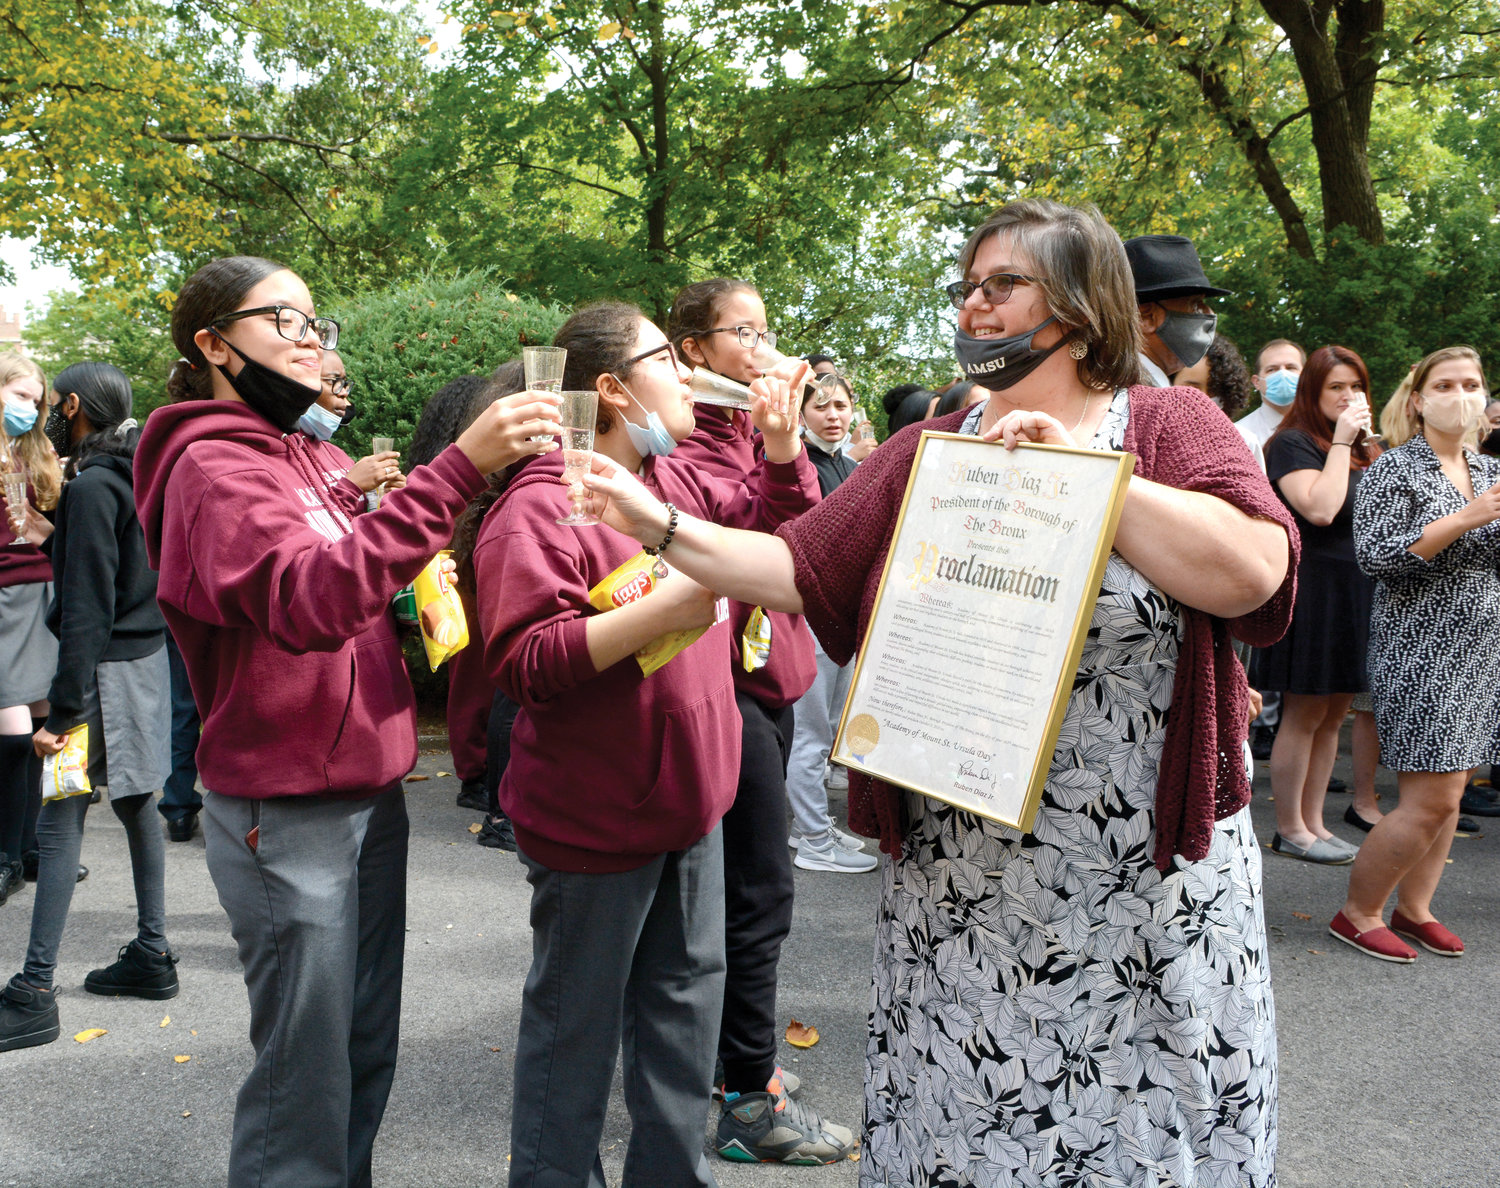 Sister Jean Marie Humphries, O.S.U., principal of Academy of Mount St. Ursula in the Bronx, marks the school’s 165th anniversary Oct. 1 by sharing a Sprite toast with student Ashley Veriguete. Sister Jean Marie holds a proclamation from the office of the Bronx borough president Ruben Diaz Jr. citing that day as Academy of Mount St. Ursula Day in the Bronx.